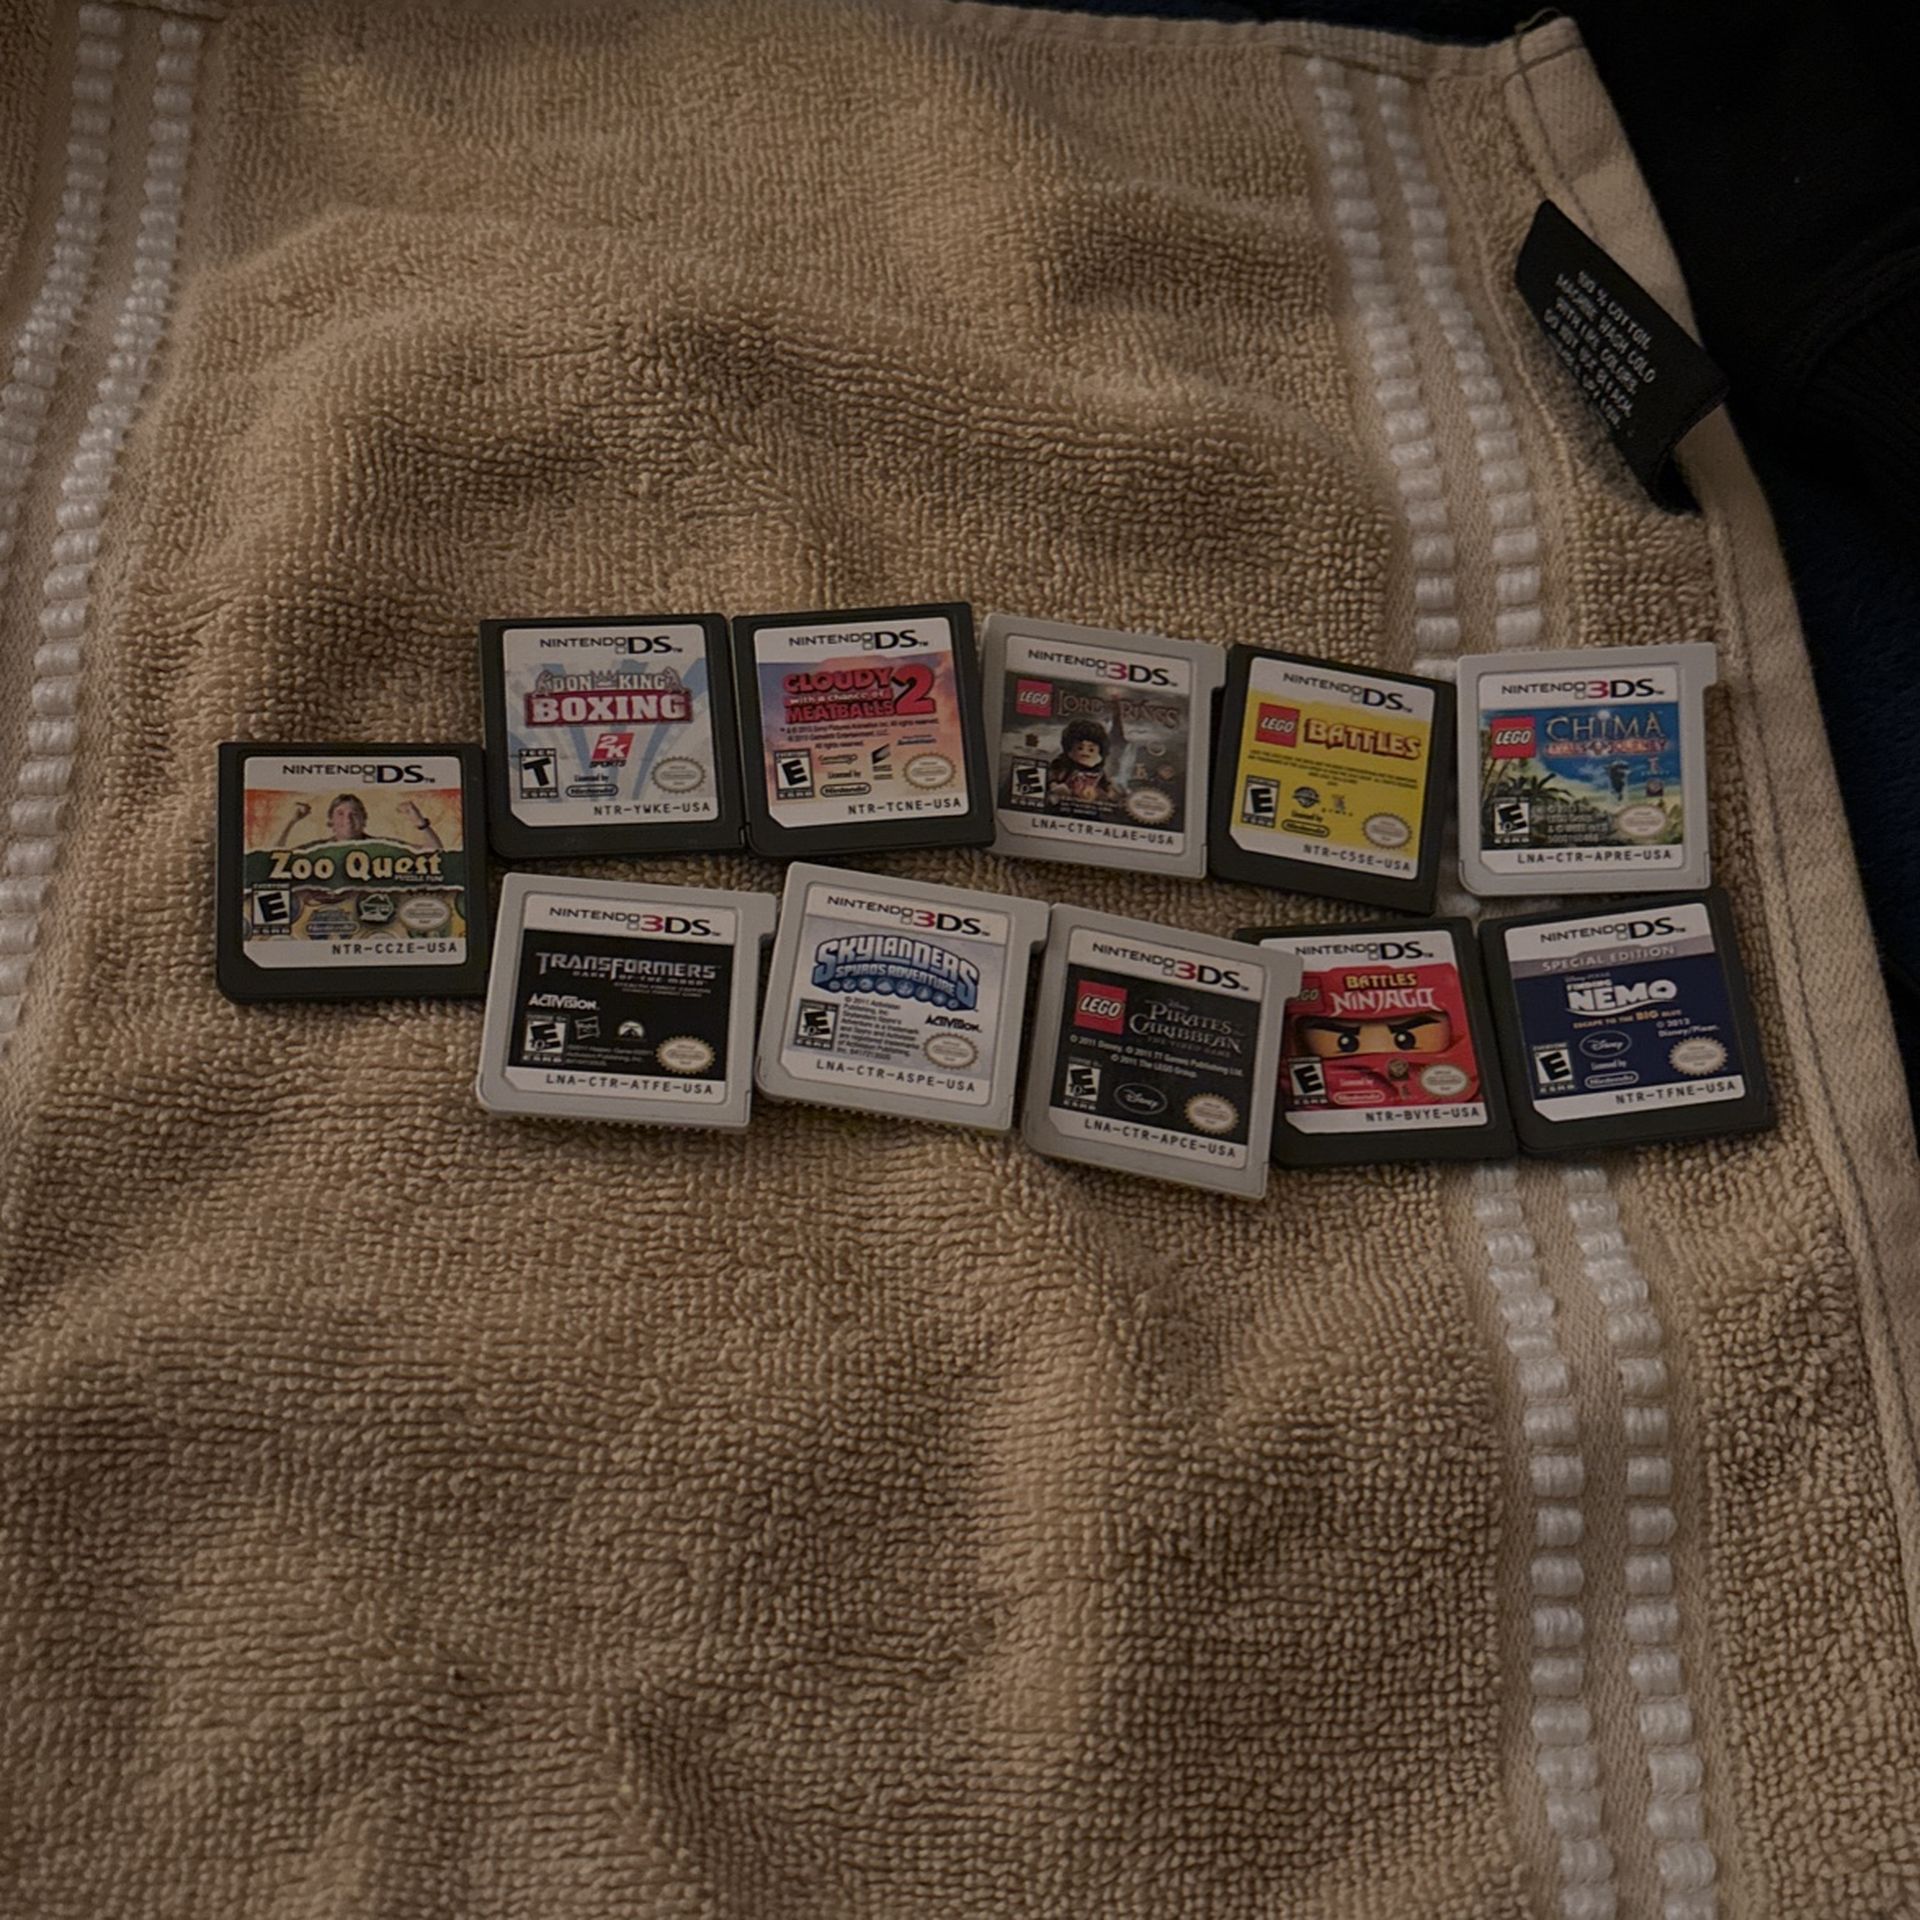 Nintendo Ds and 3ds games 